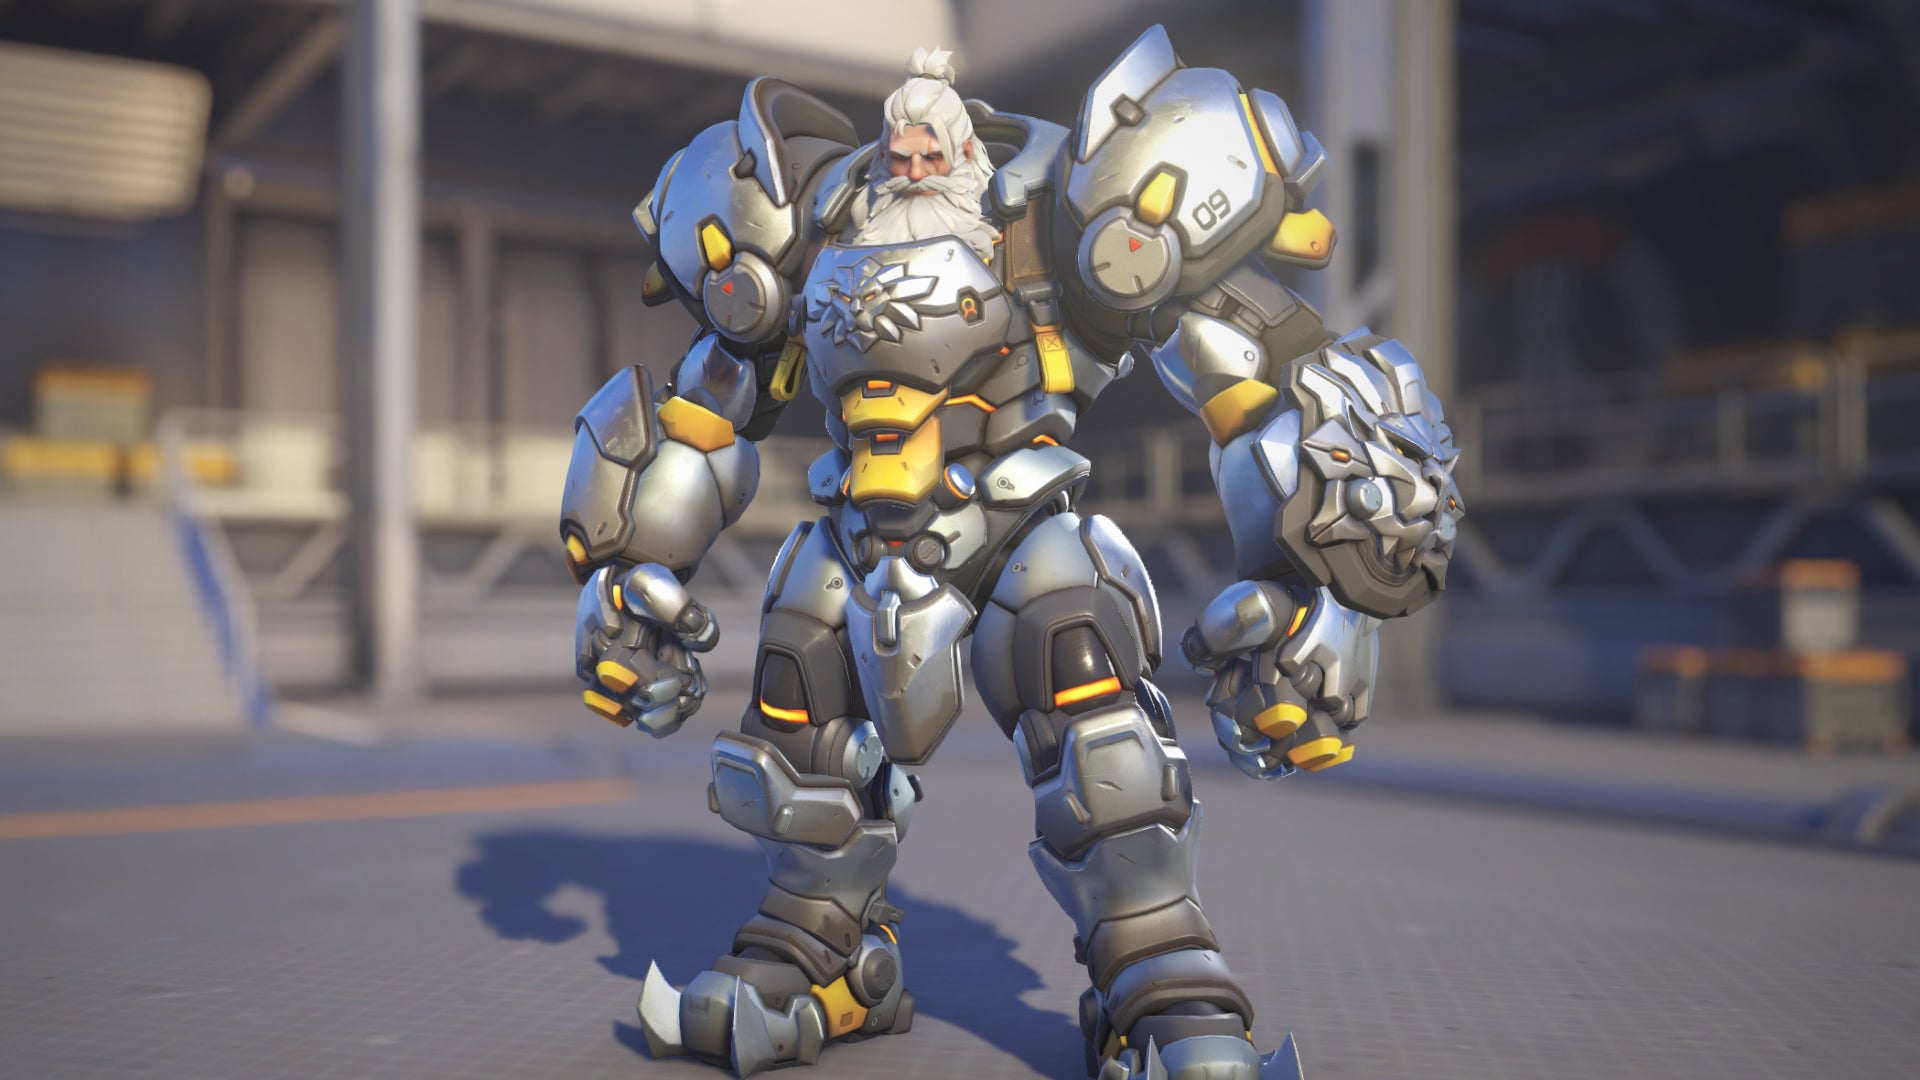 Reinhardt, a hero in Overwatch 2, poses before the camera in the hero selection screen.